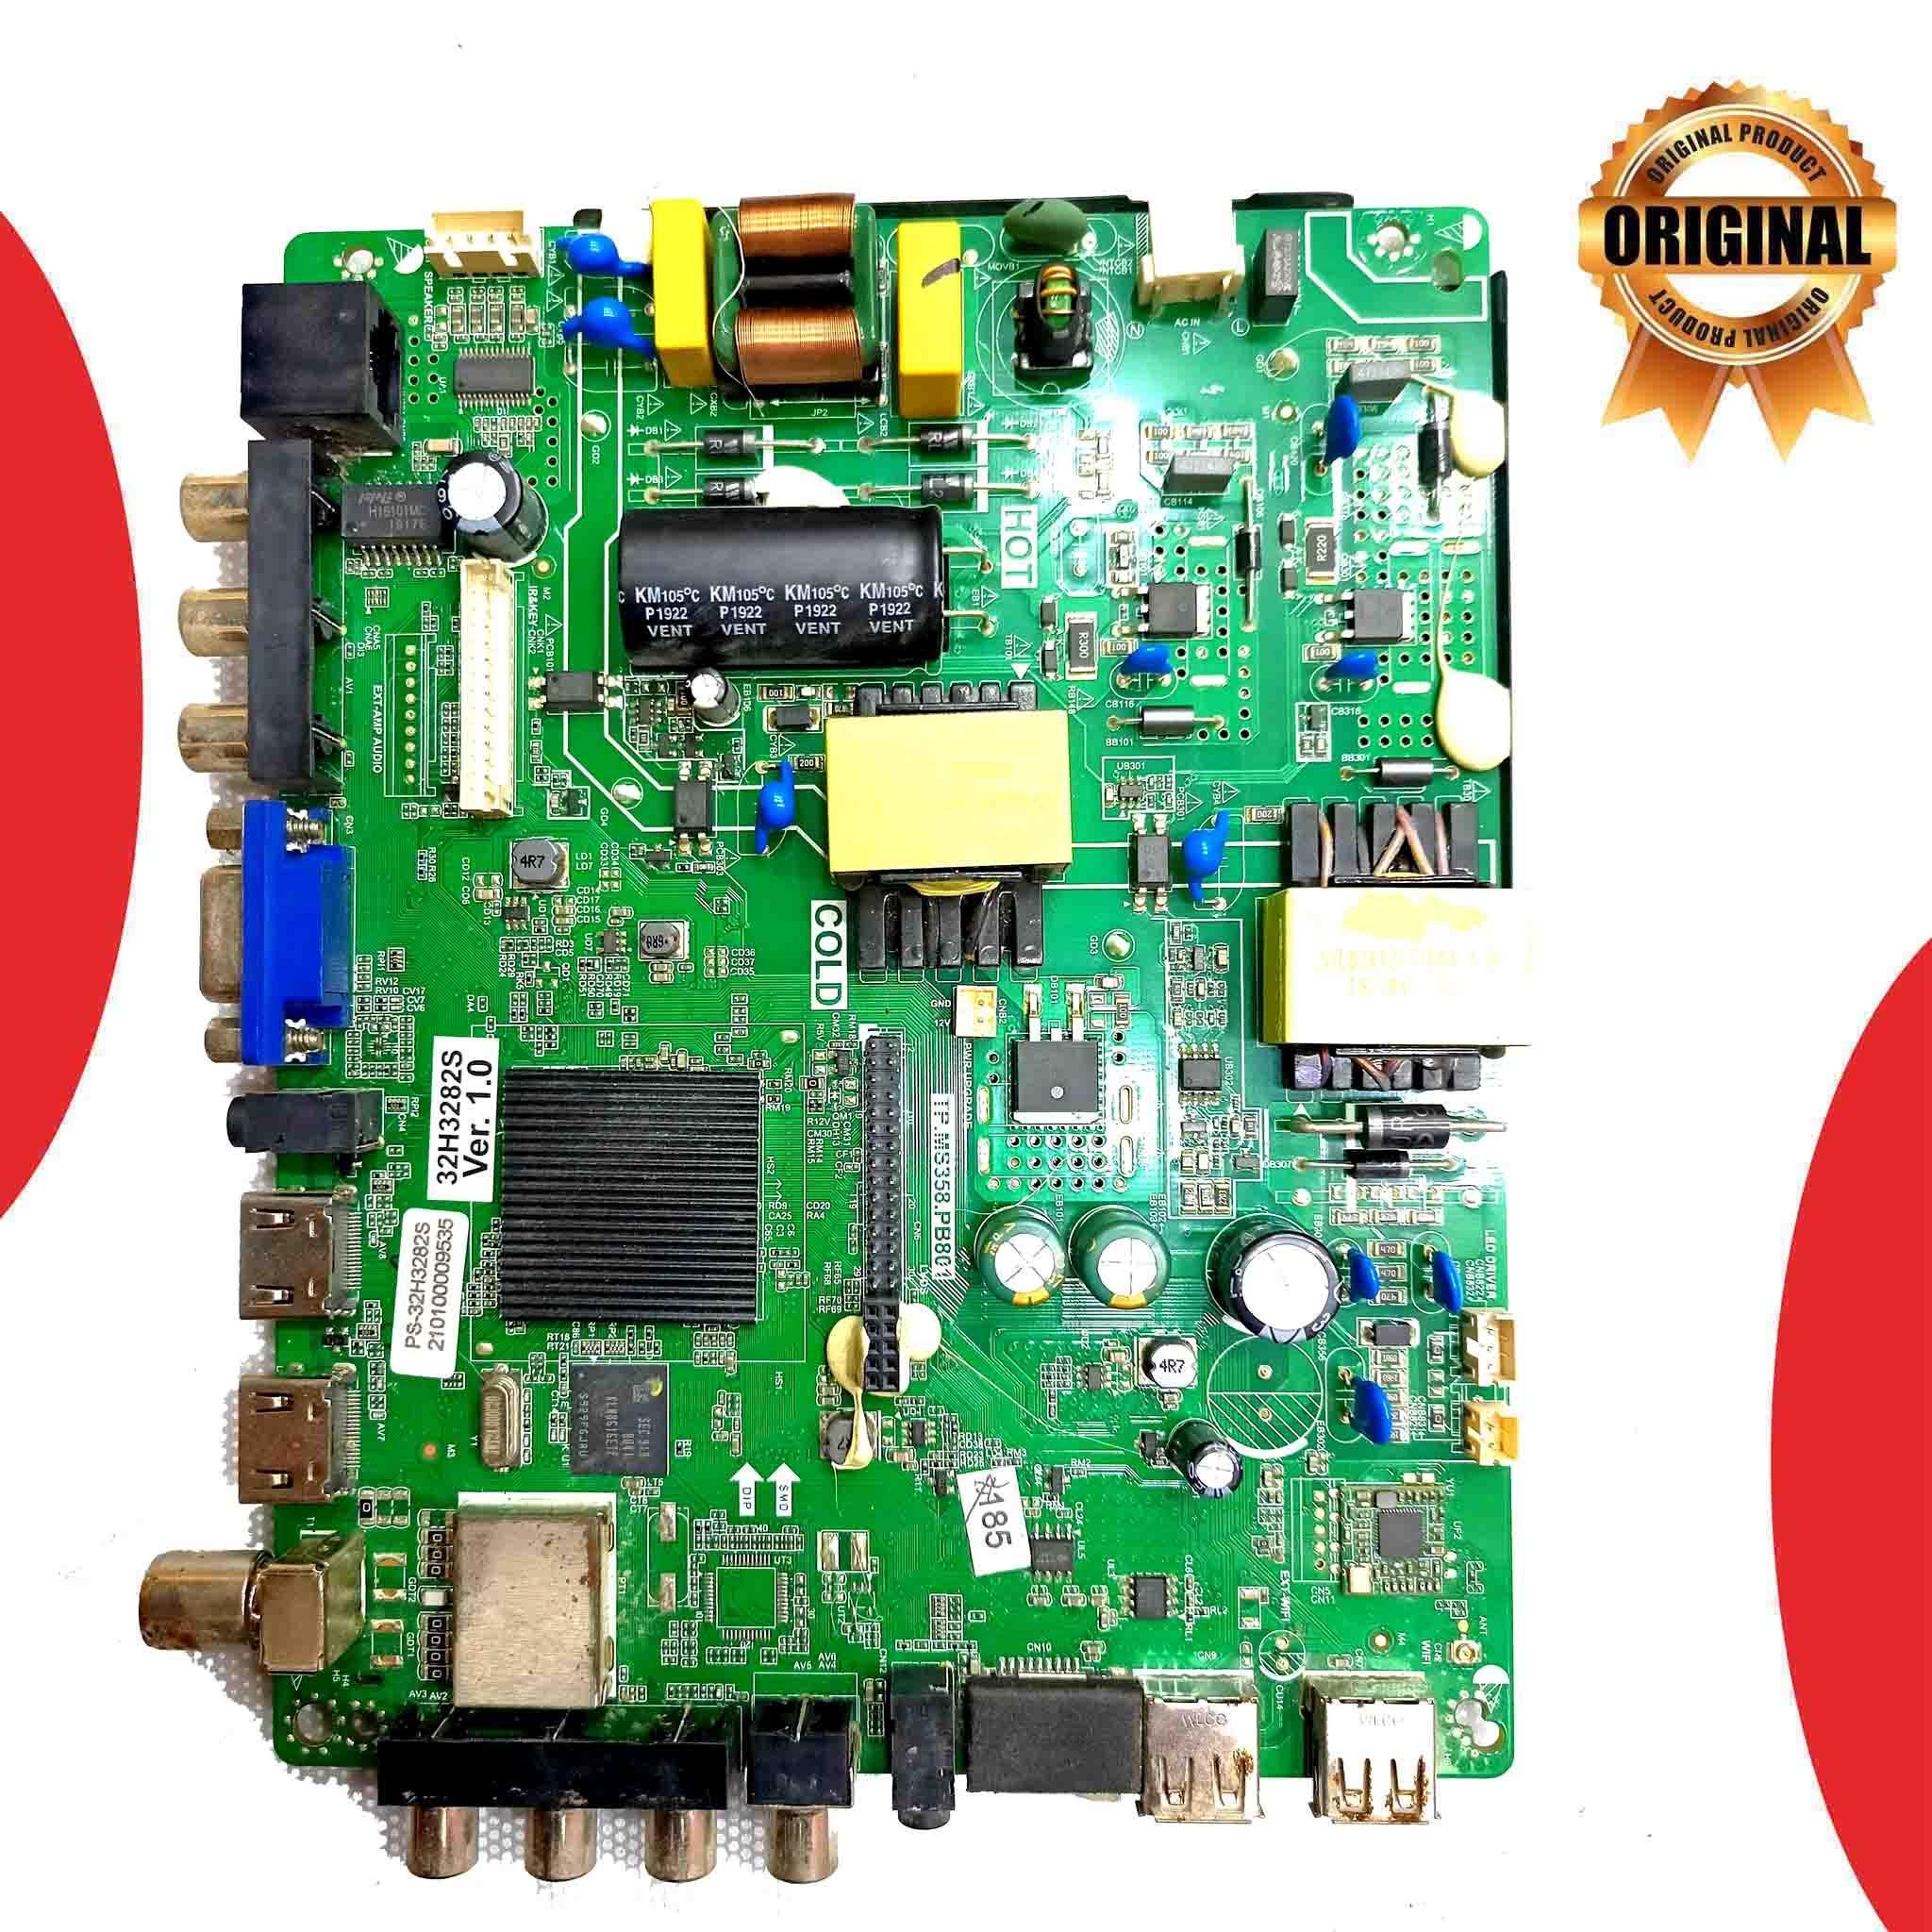 Reconnect 32 inch LED TV Motherboard for Model 32H3282S - Great Bharat Electronics